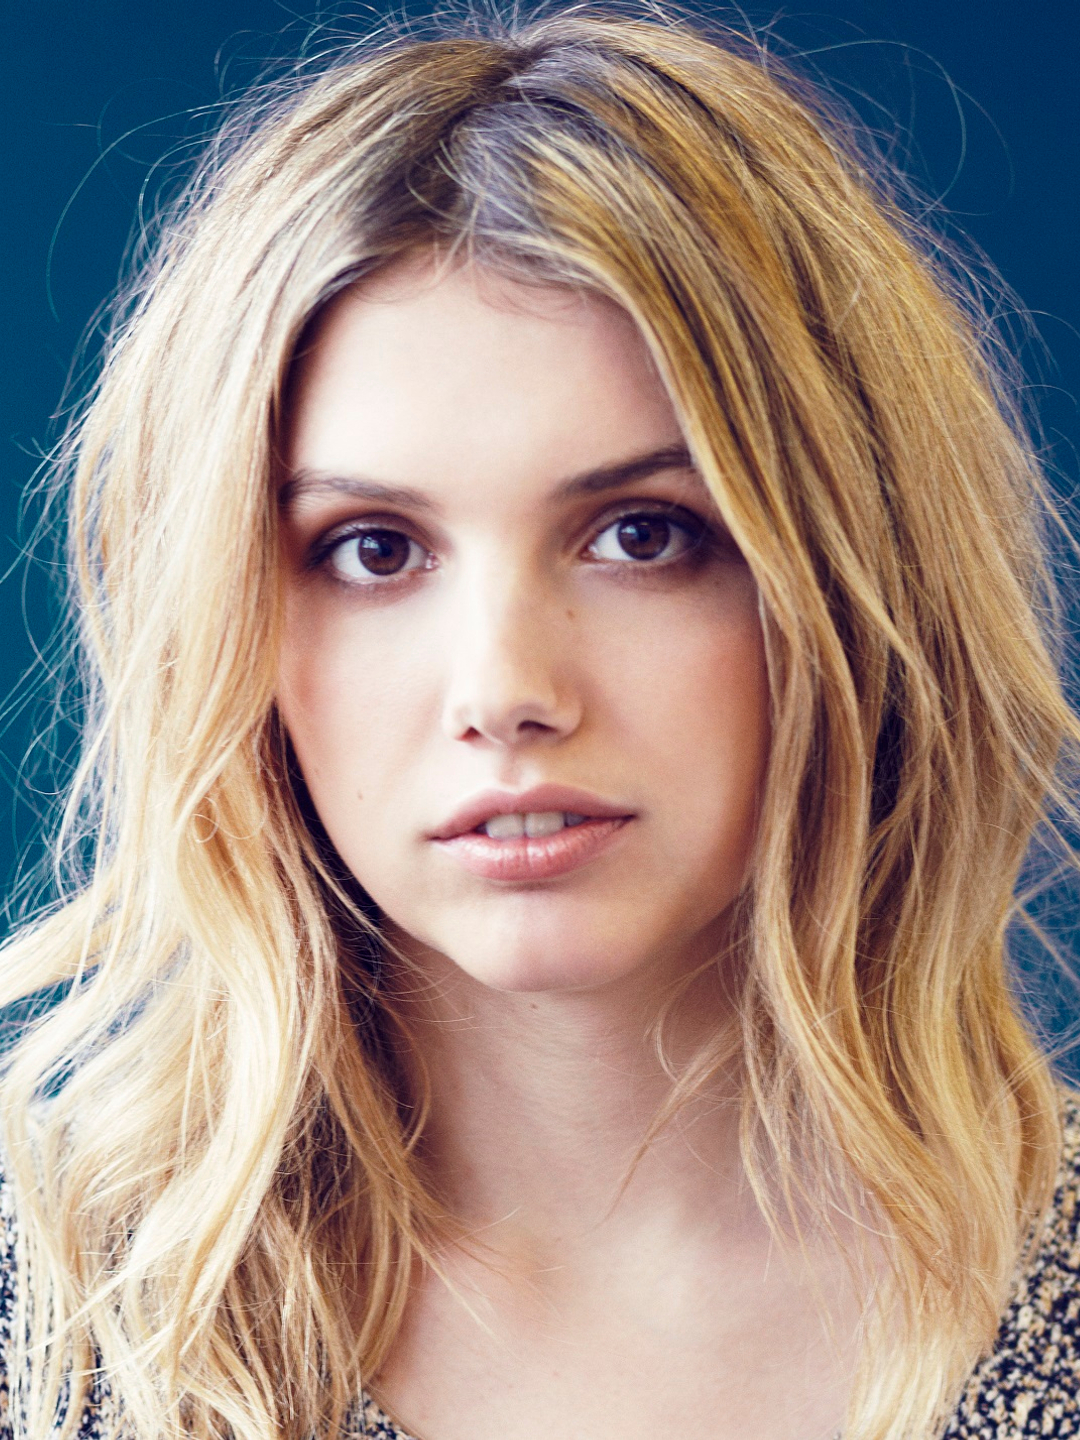 Hannah Murray unphotoshopped pictures